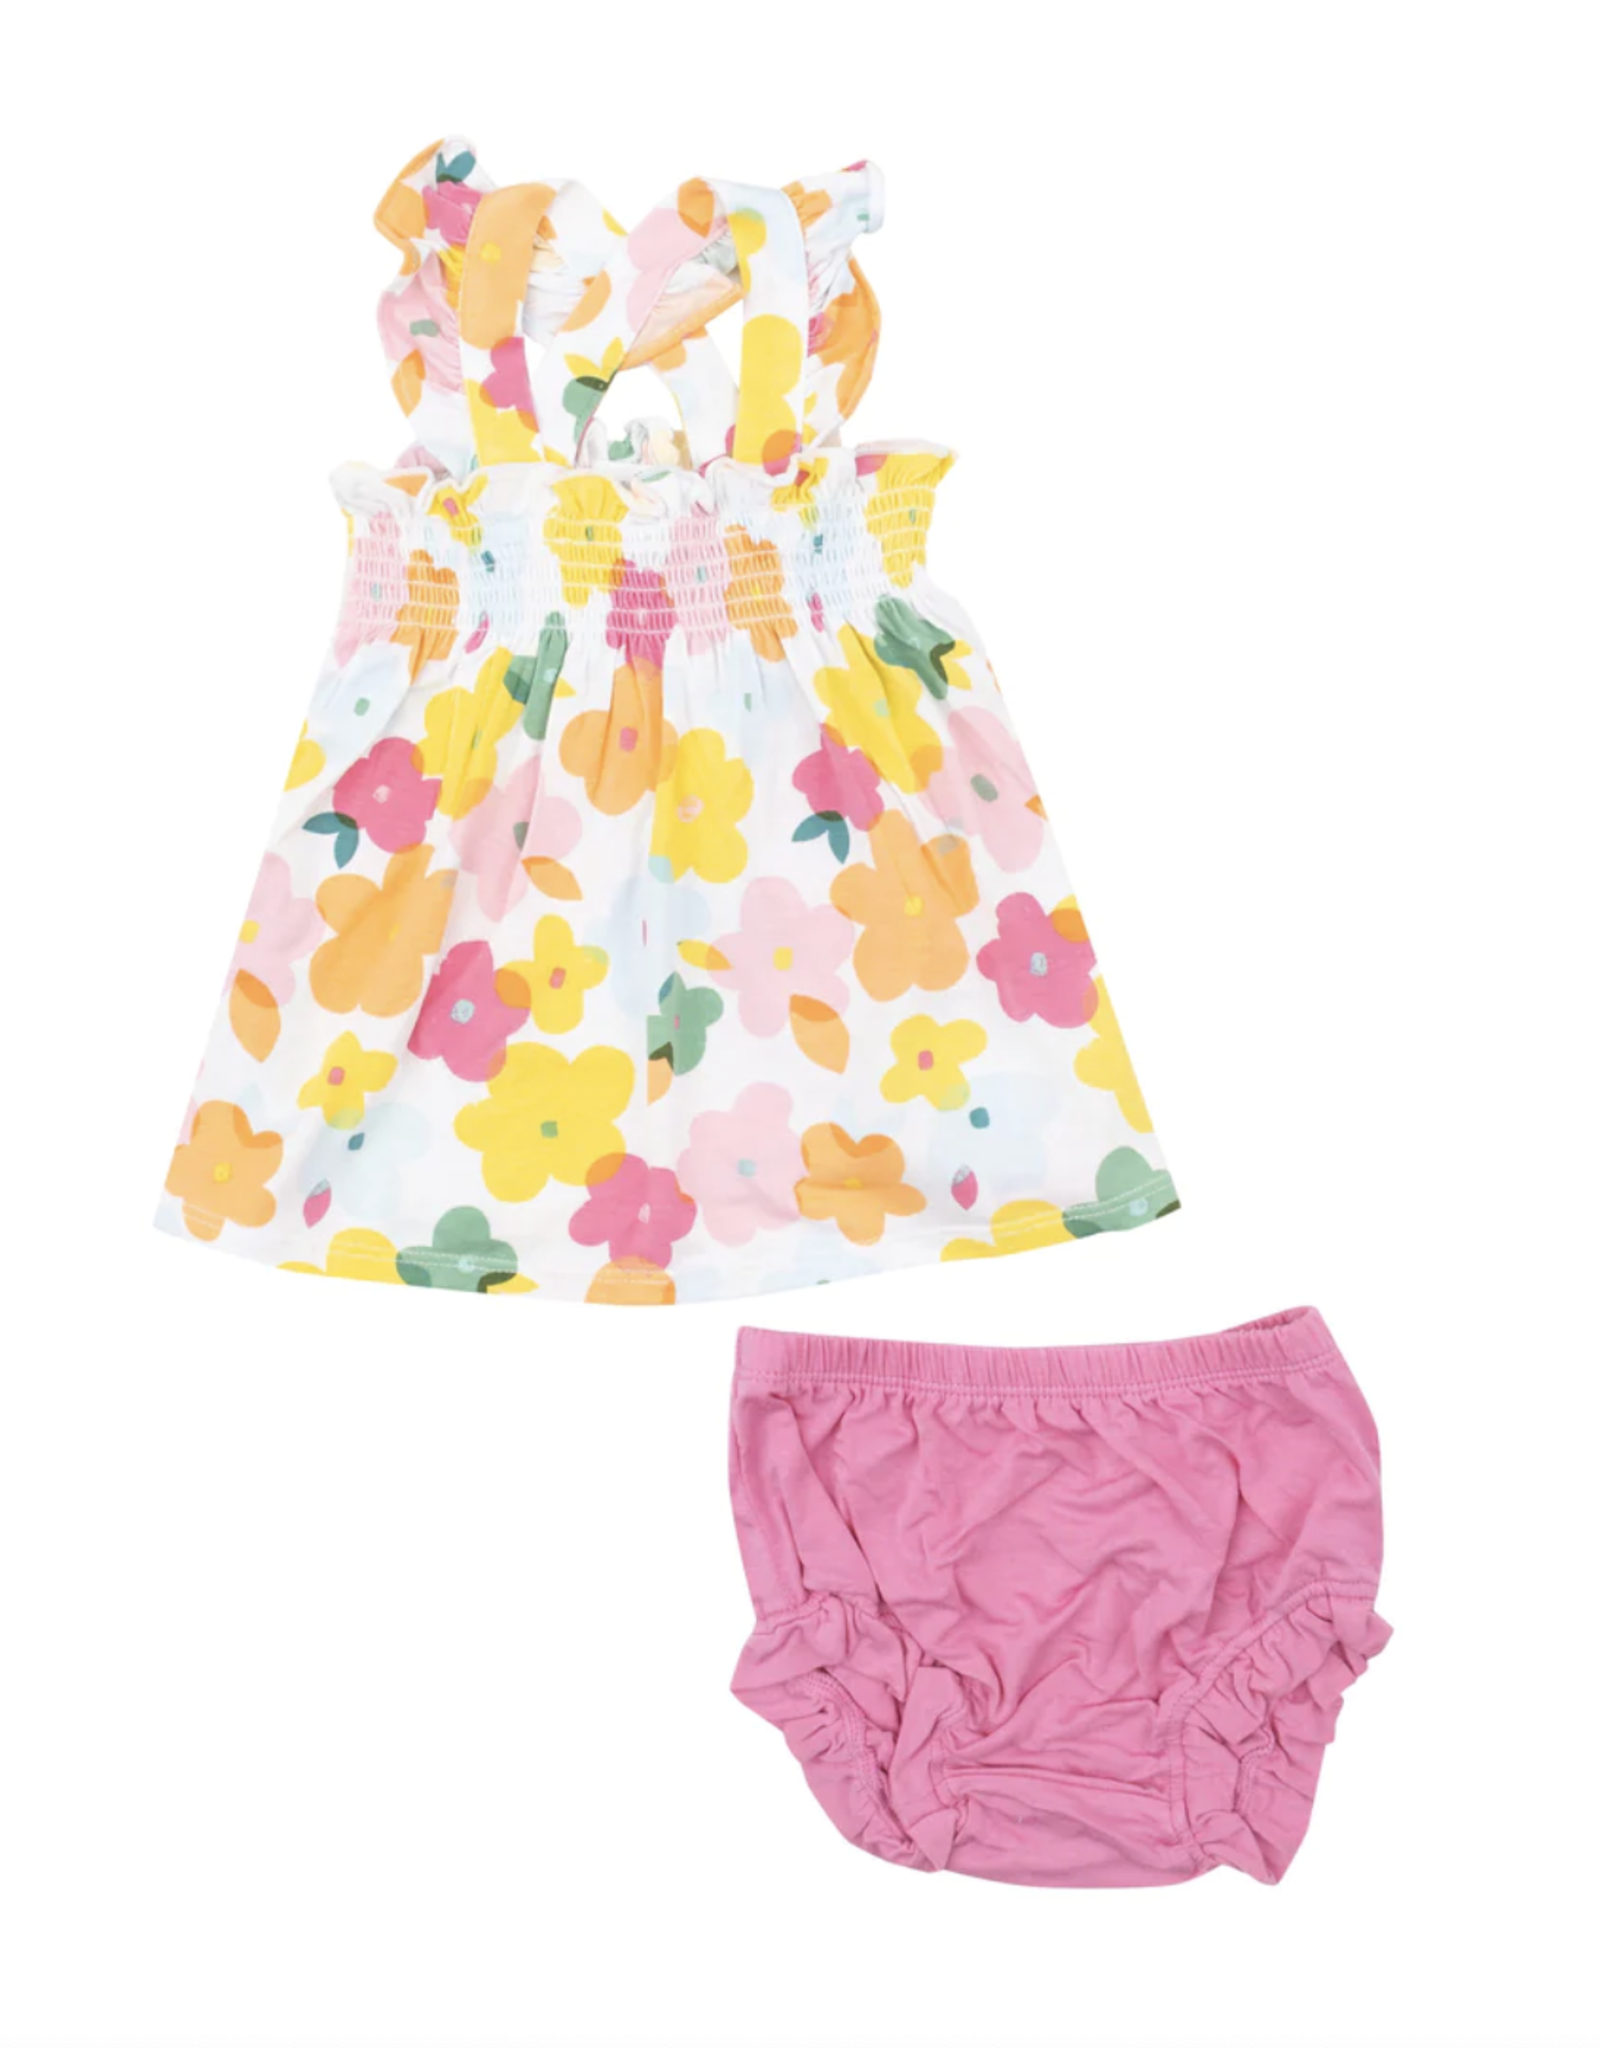 Ruffle Strap Smocked Top & Diaper Cover, Paper Floral